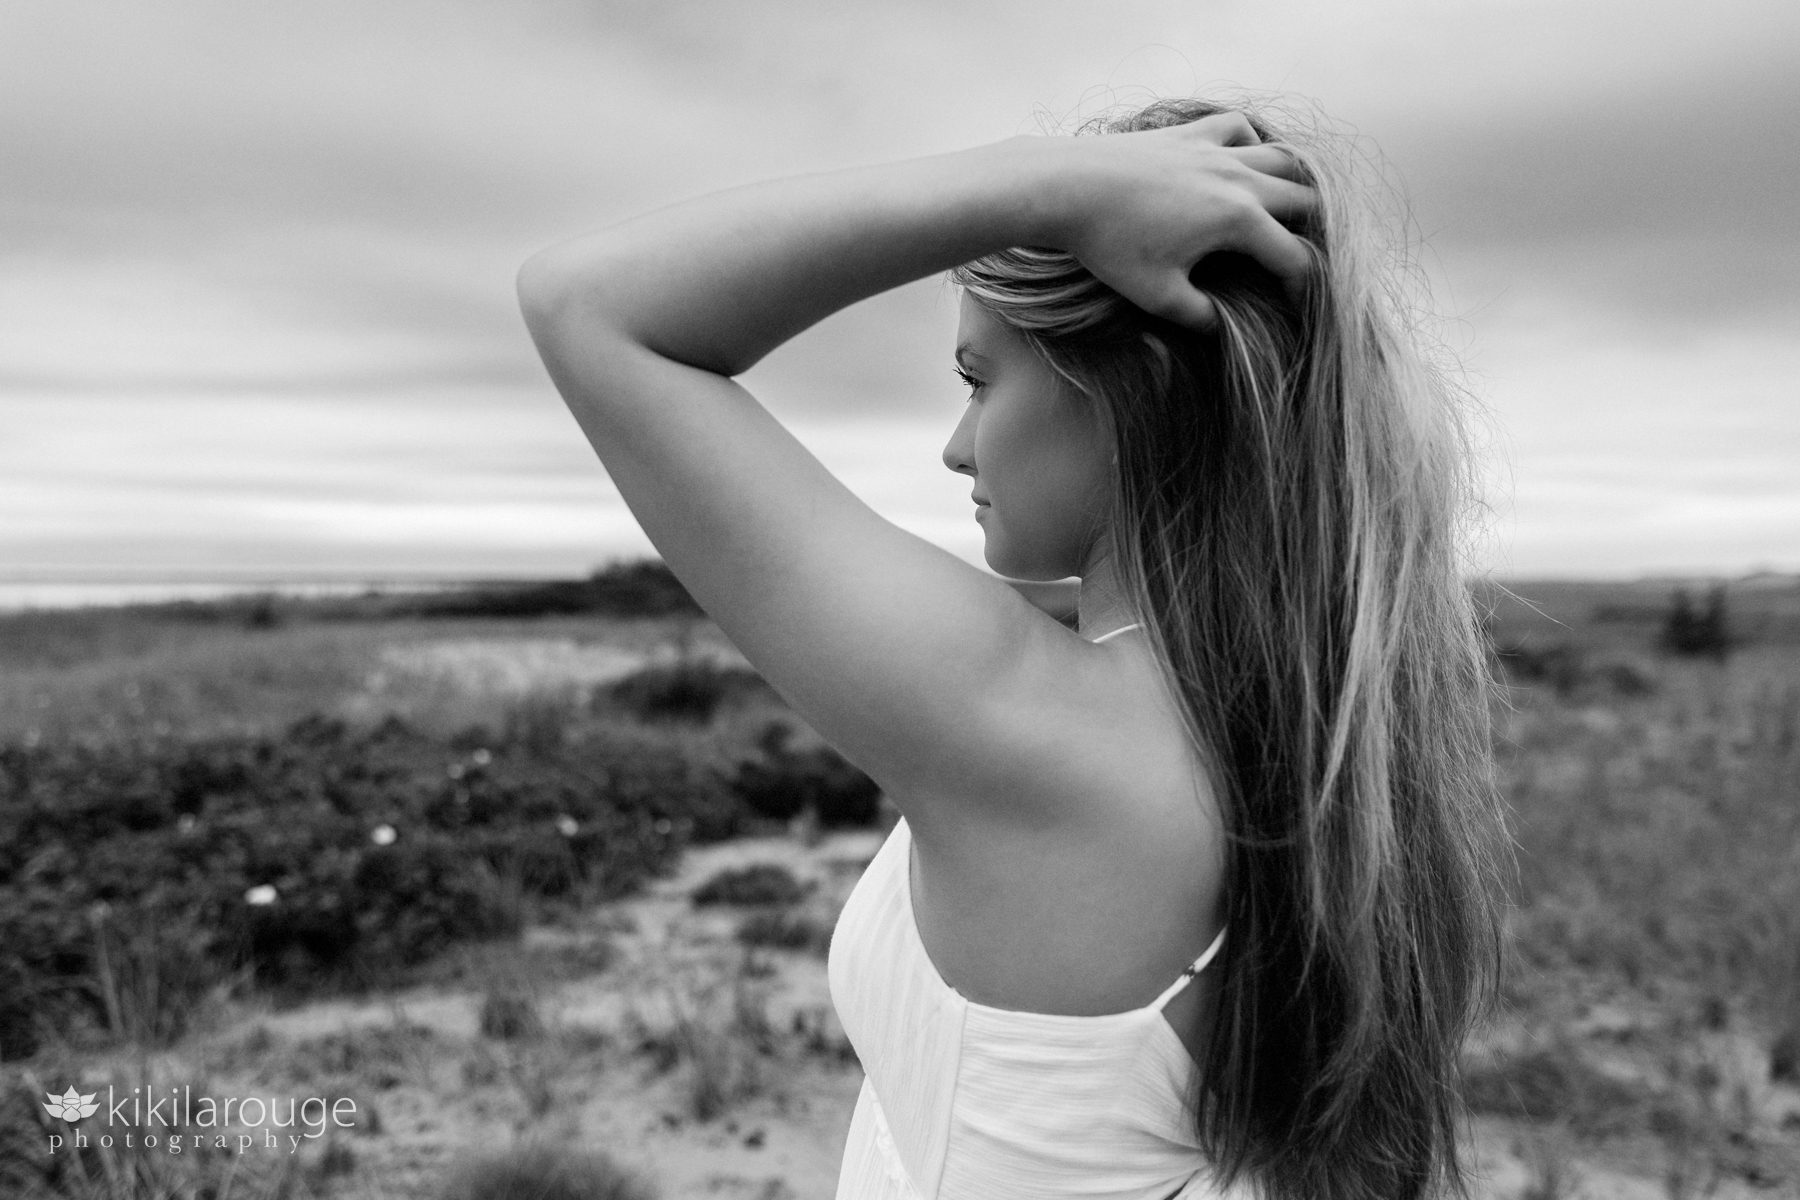 Senior girl long blonde hair with hands on head looking out at dunes and ocean